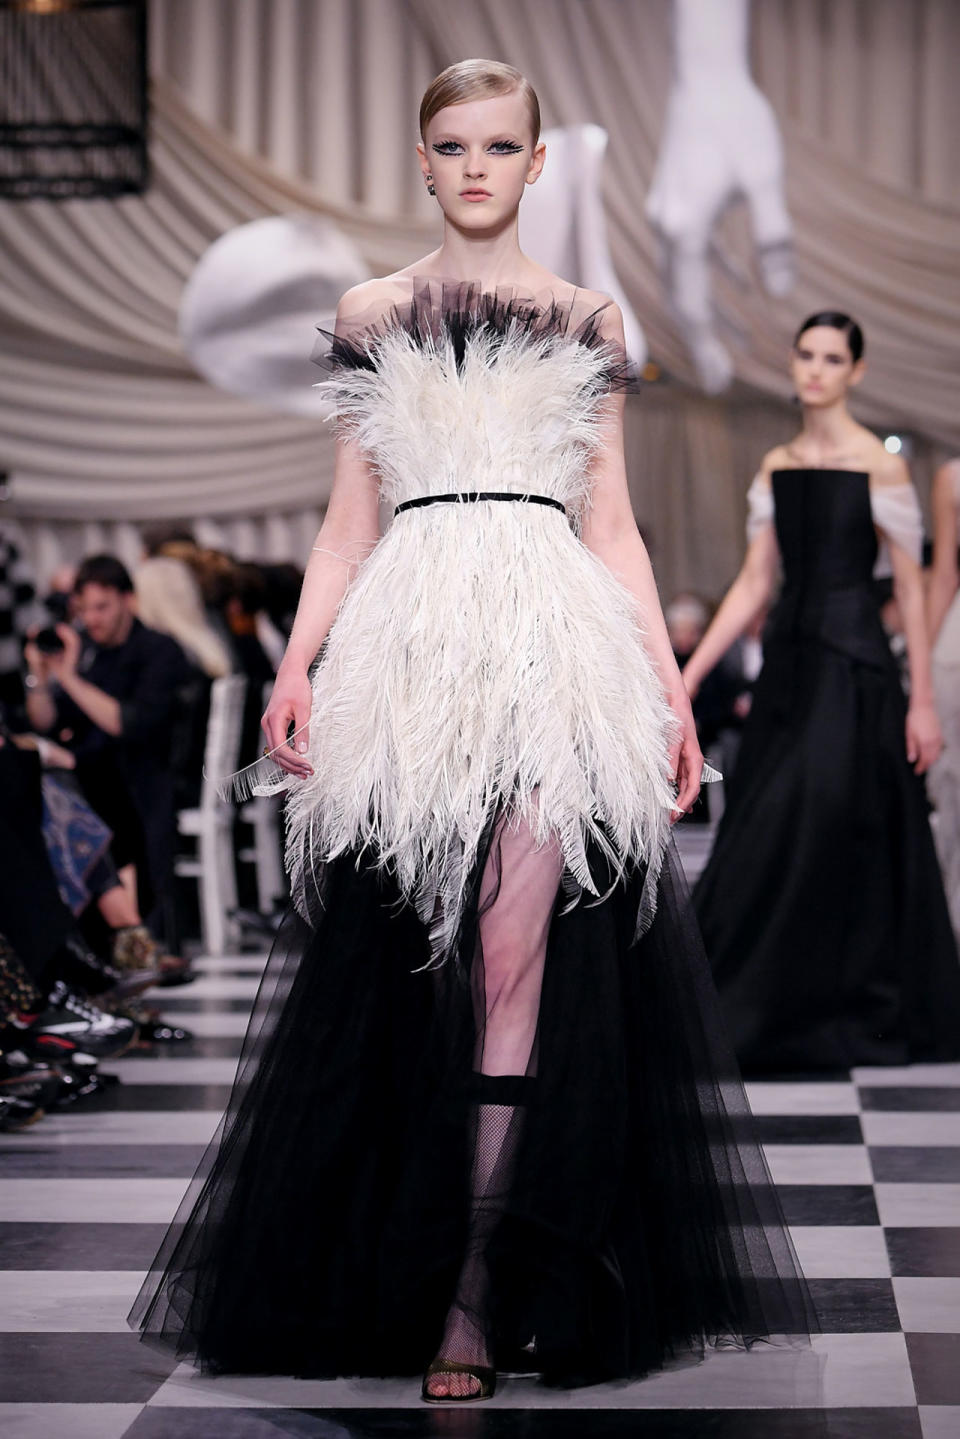 <p>Model wears a white and black feathered bodice gown featuring black tulle, from the Dior SS18 Haute Couture show. (Photo: Getty Images) </p>